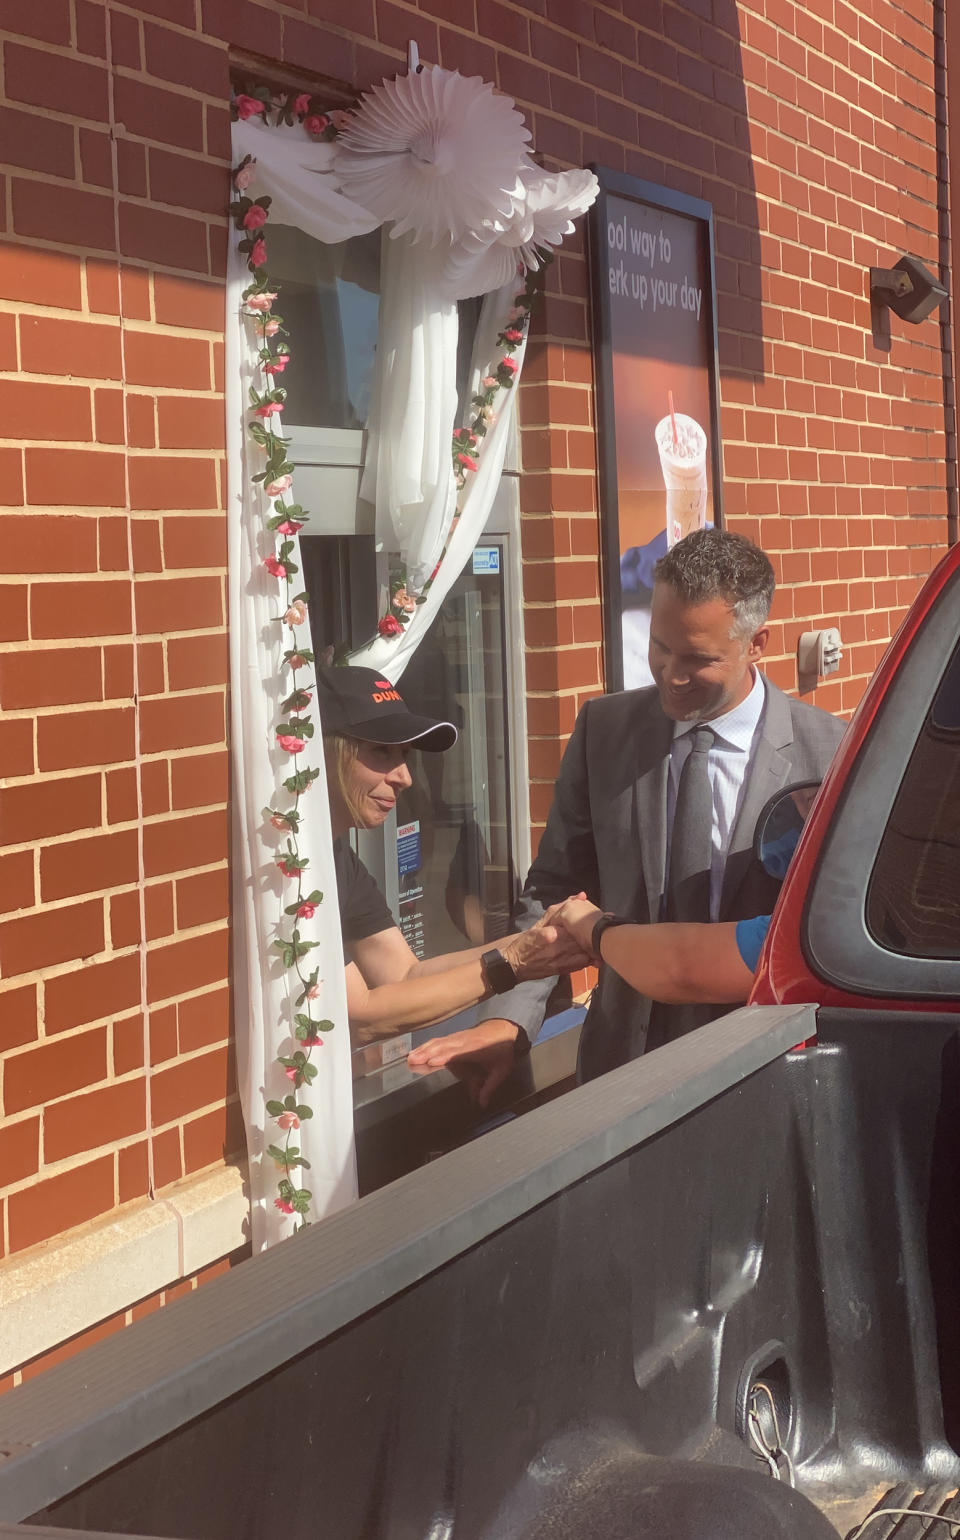 Sugar Good and John Thompson wed this month in the very place they first met: the Dunkin' drive-thru. (Courtesy Jillian Gallagher and Emma Burke)